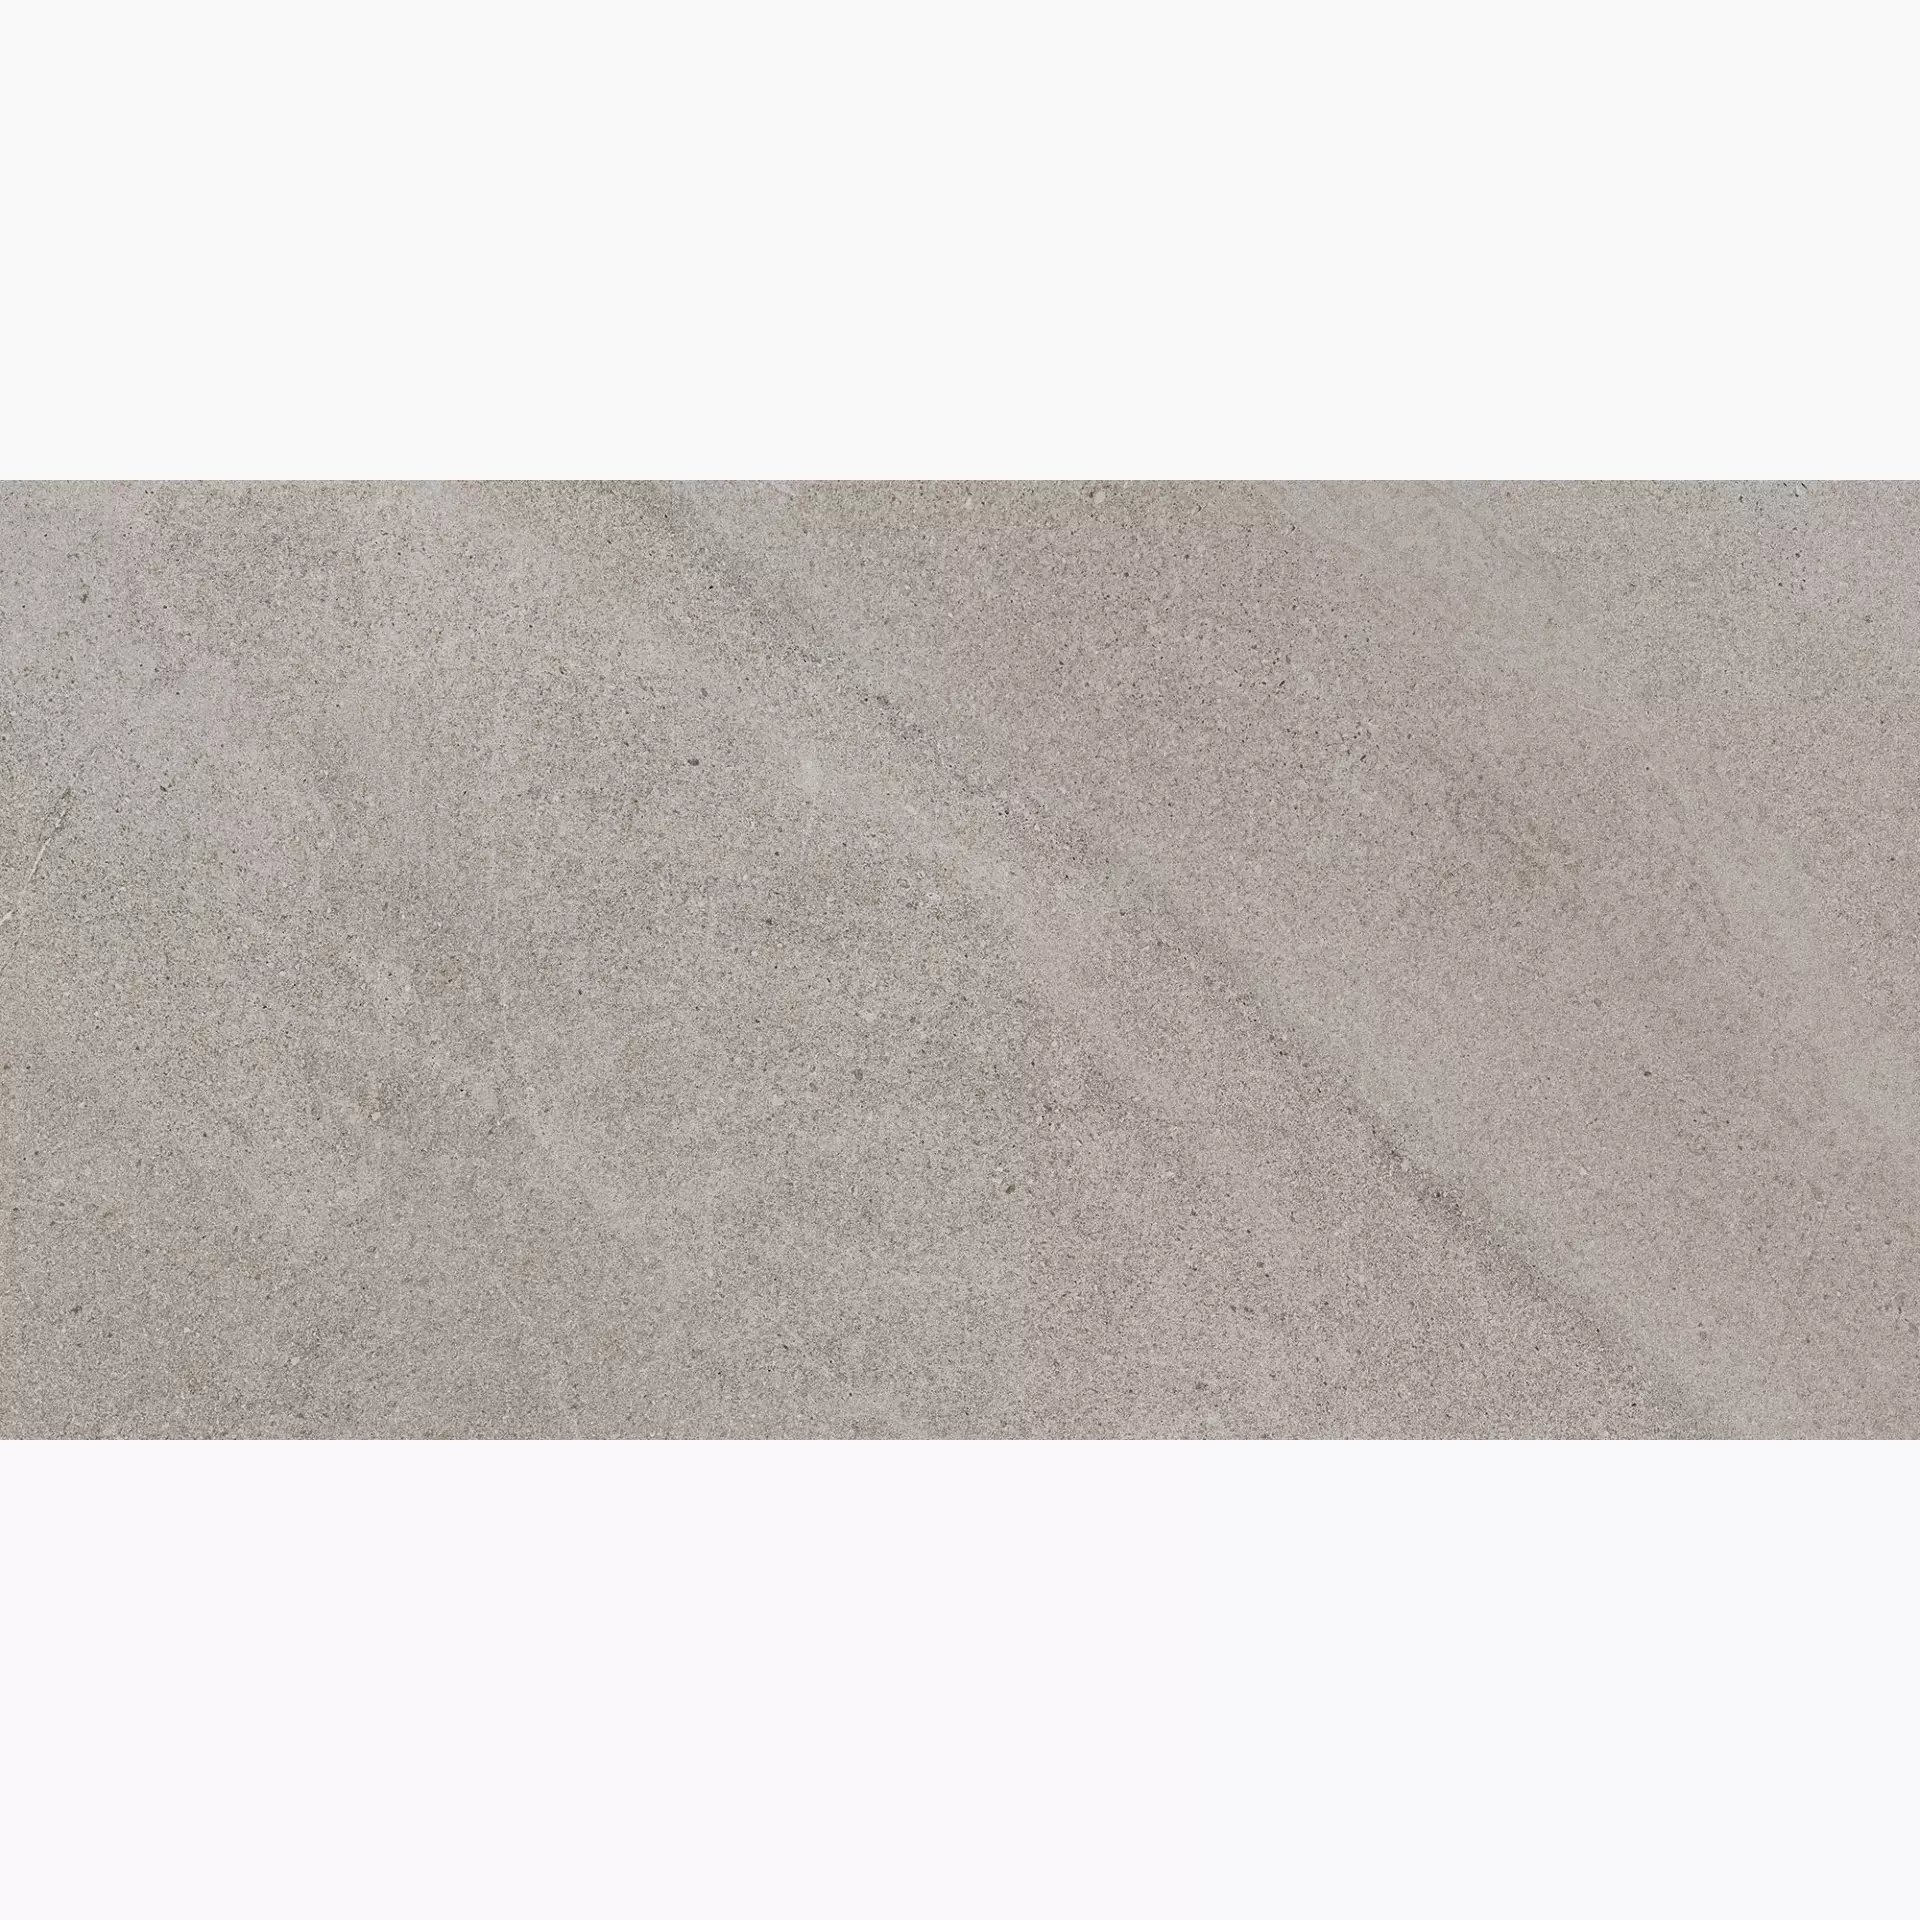 Cottodeste Limestone Oyster Blazed Protect EG-LS25 30x60cm rectified 14mm